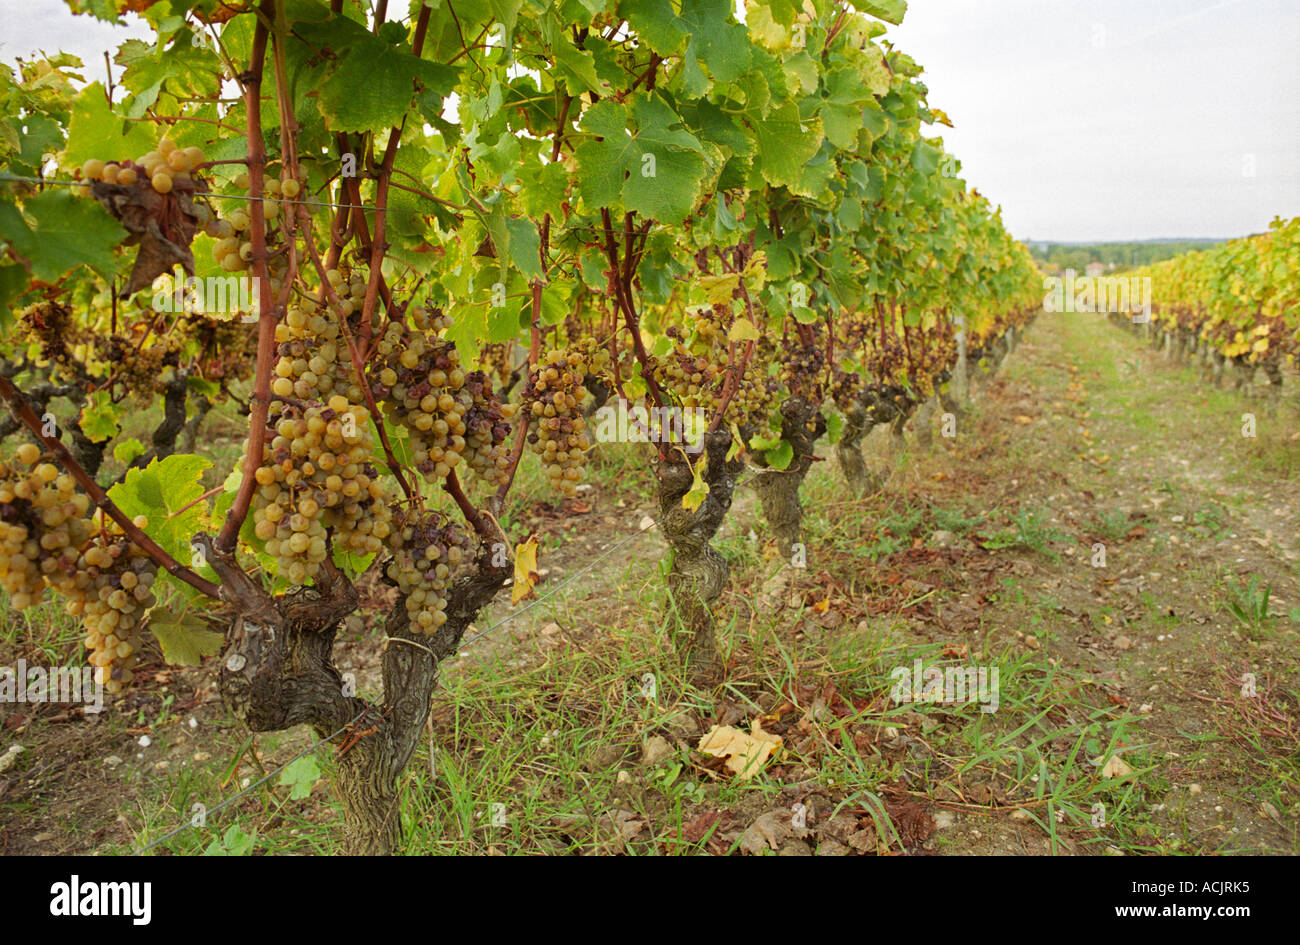 Semillon grapes with noble rot on vines in converging perspective on sandy and gravely soil.  at harvest time  Chateau d’Yquem, Stock Photo